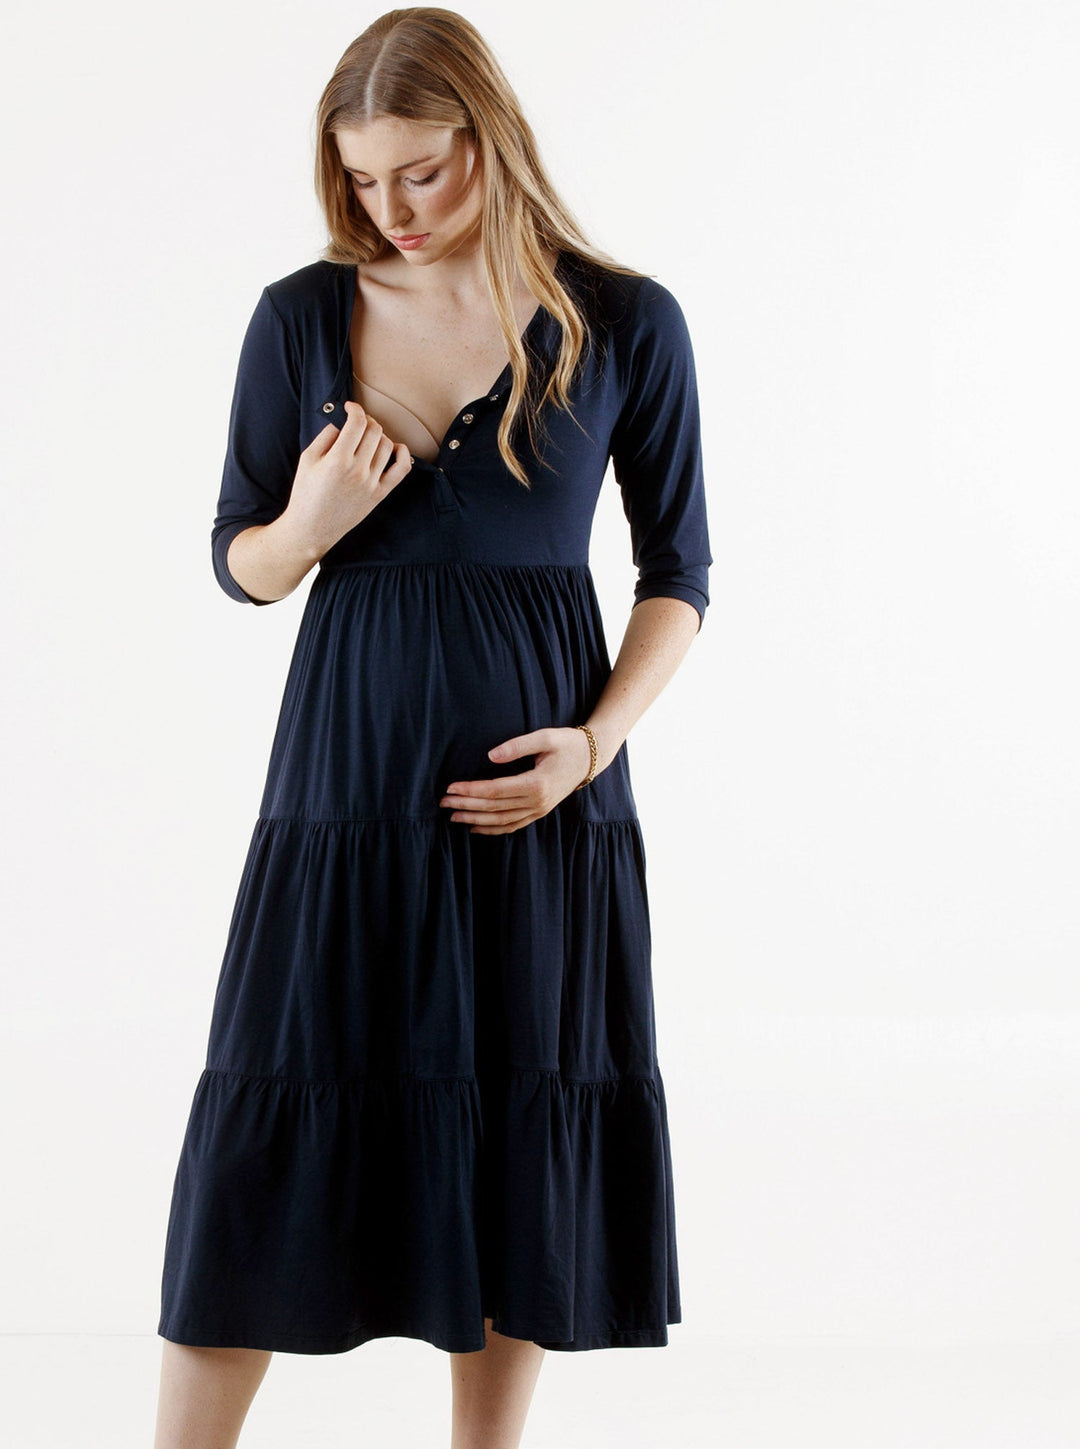 Angel Maternity 'The Essential' Bamboo Tiered Dress - Navy